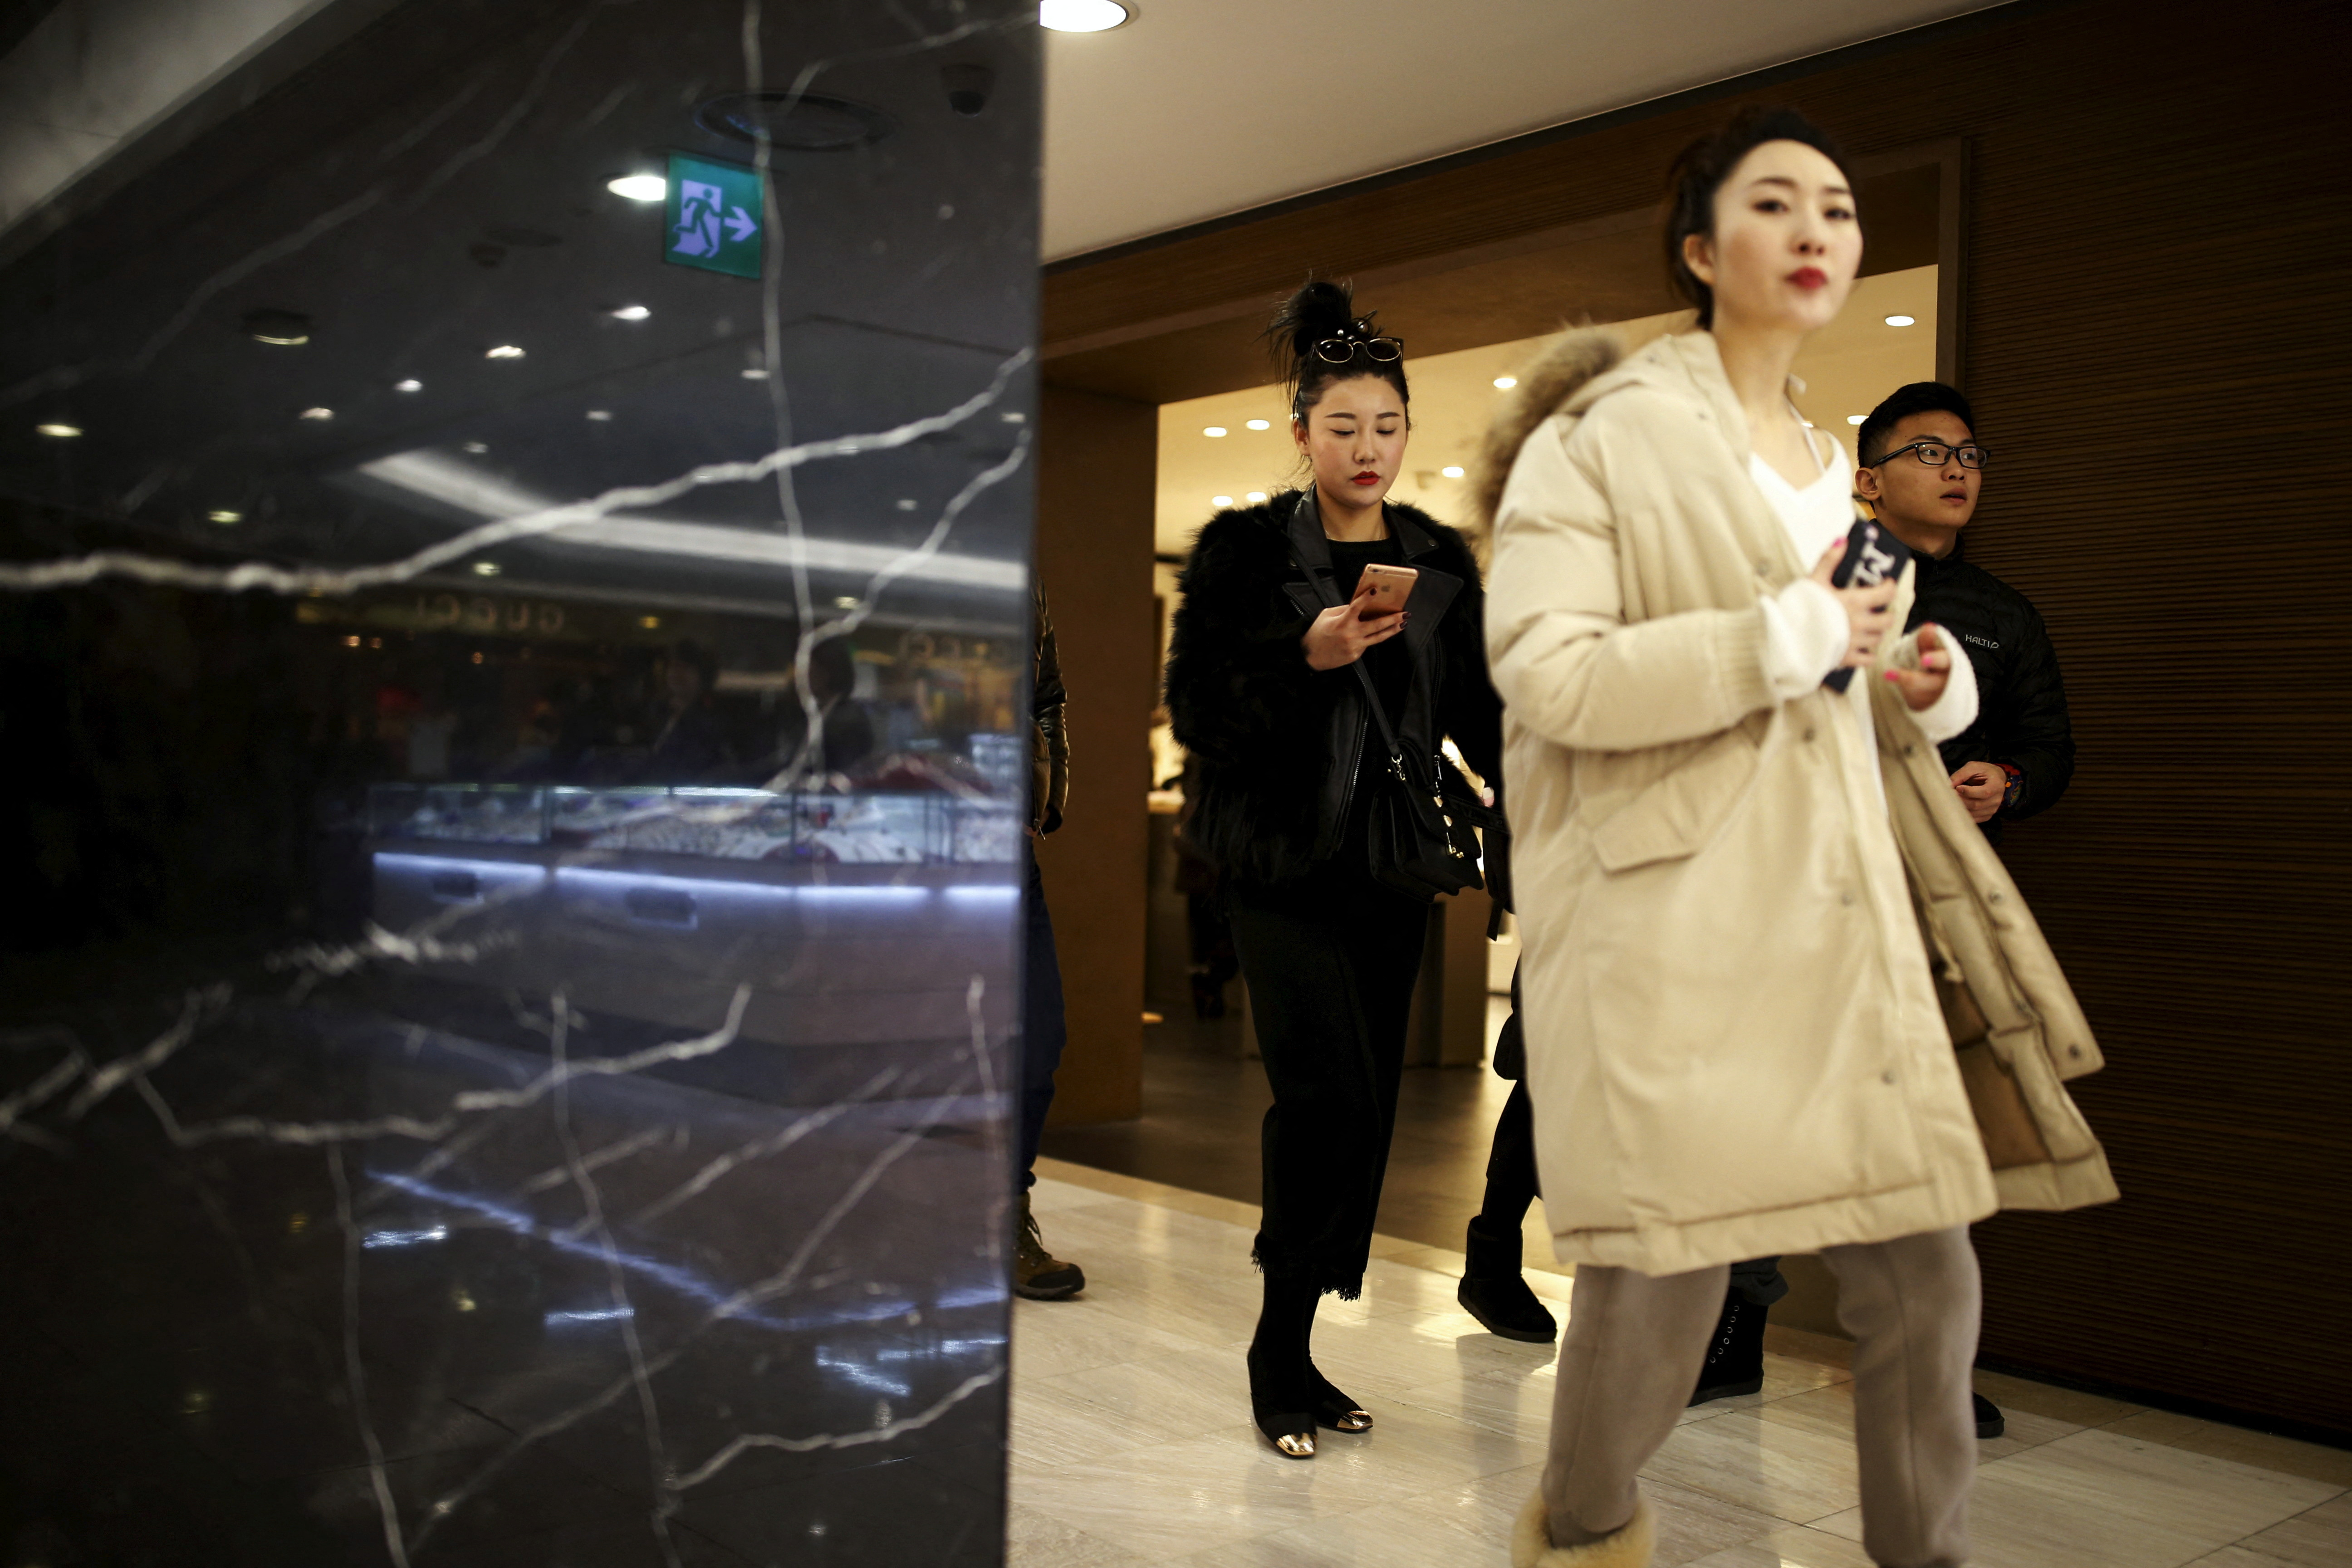 Chinese tourists shop at a Lotte duty free shop in central Seoul